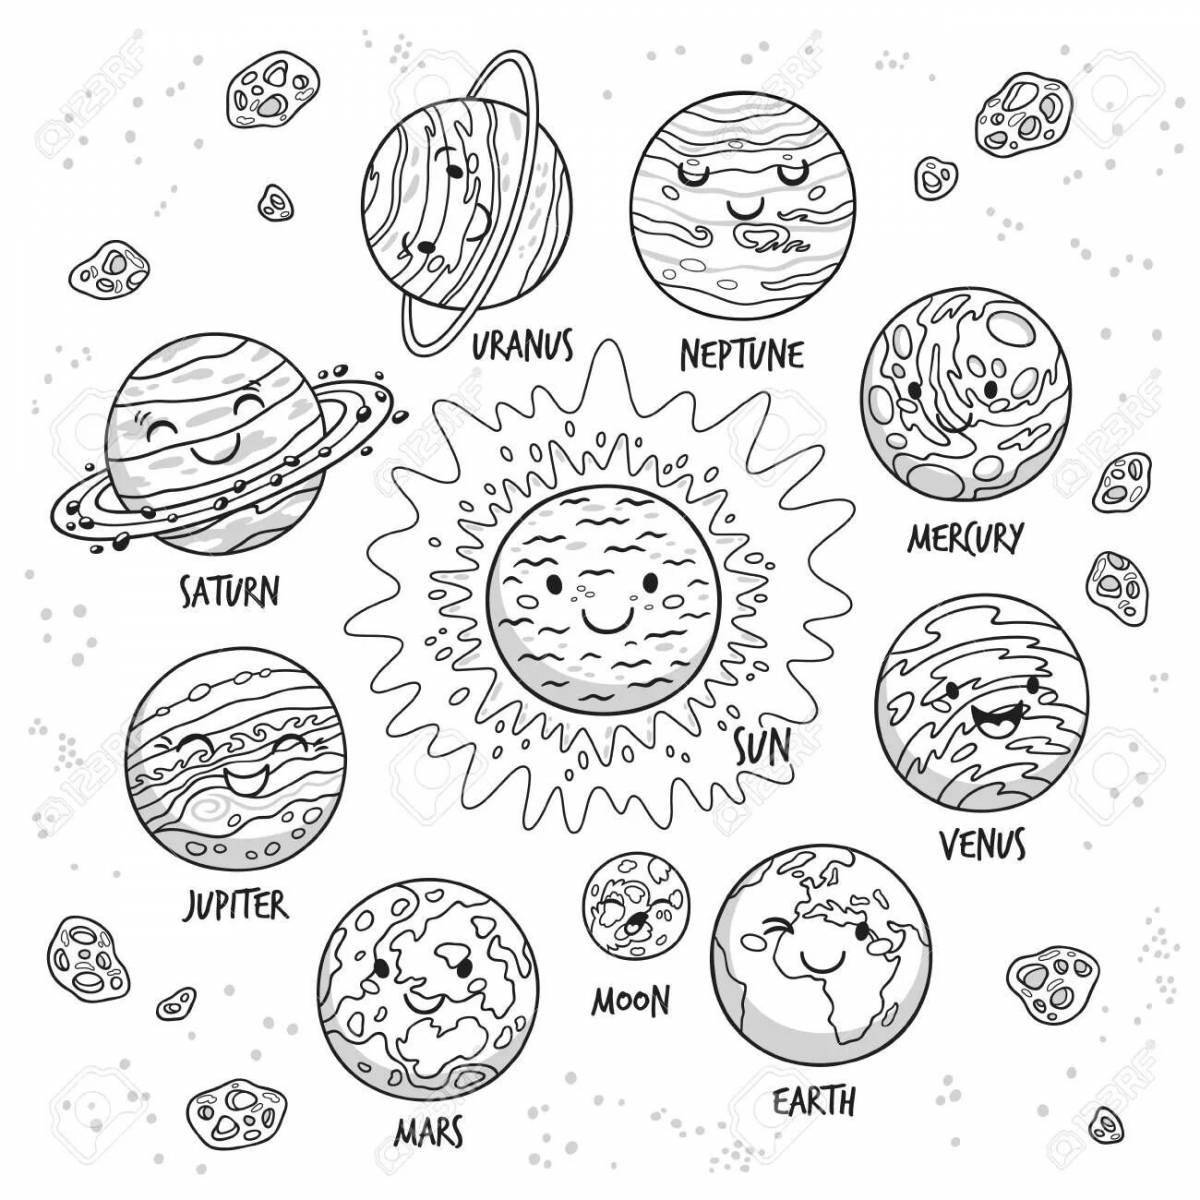 Delightful coloring of planets in the solar system